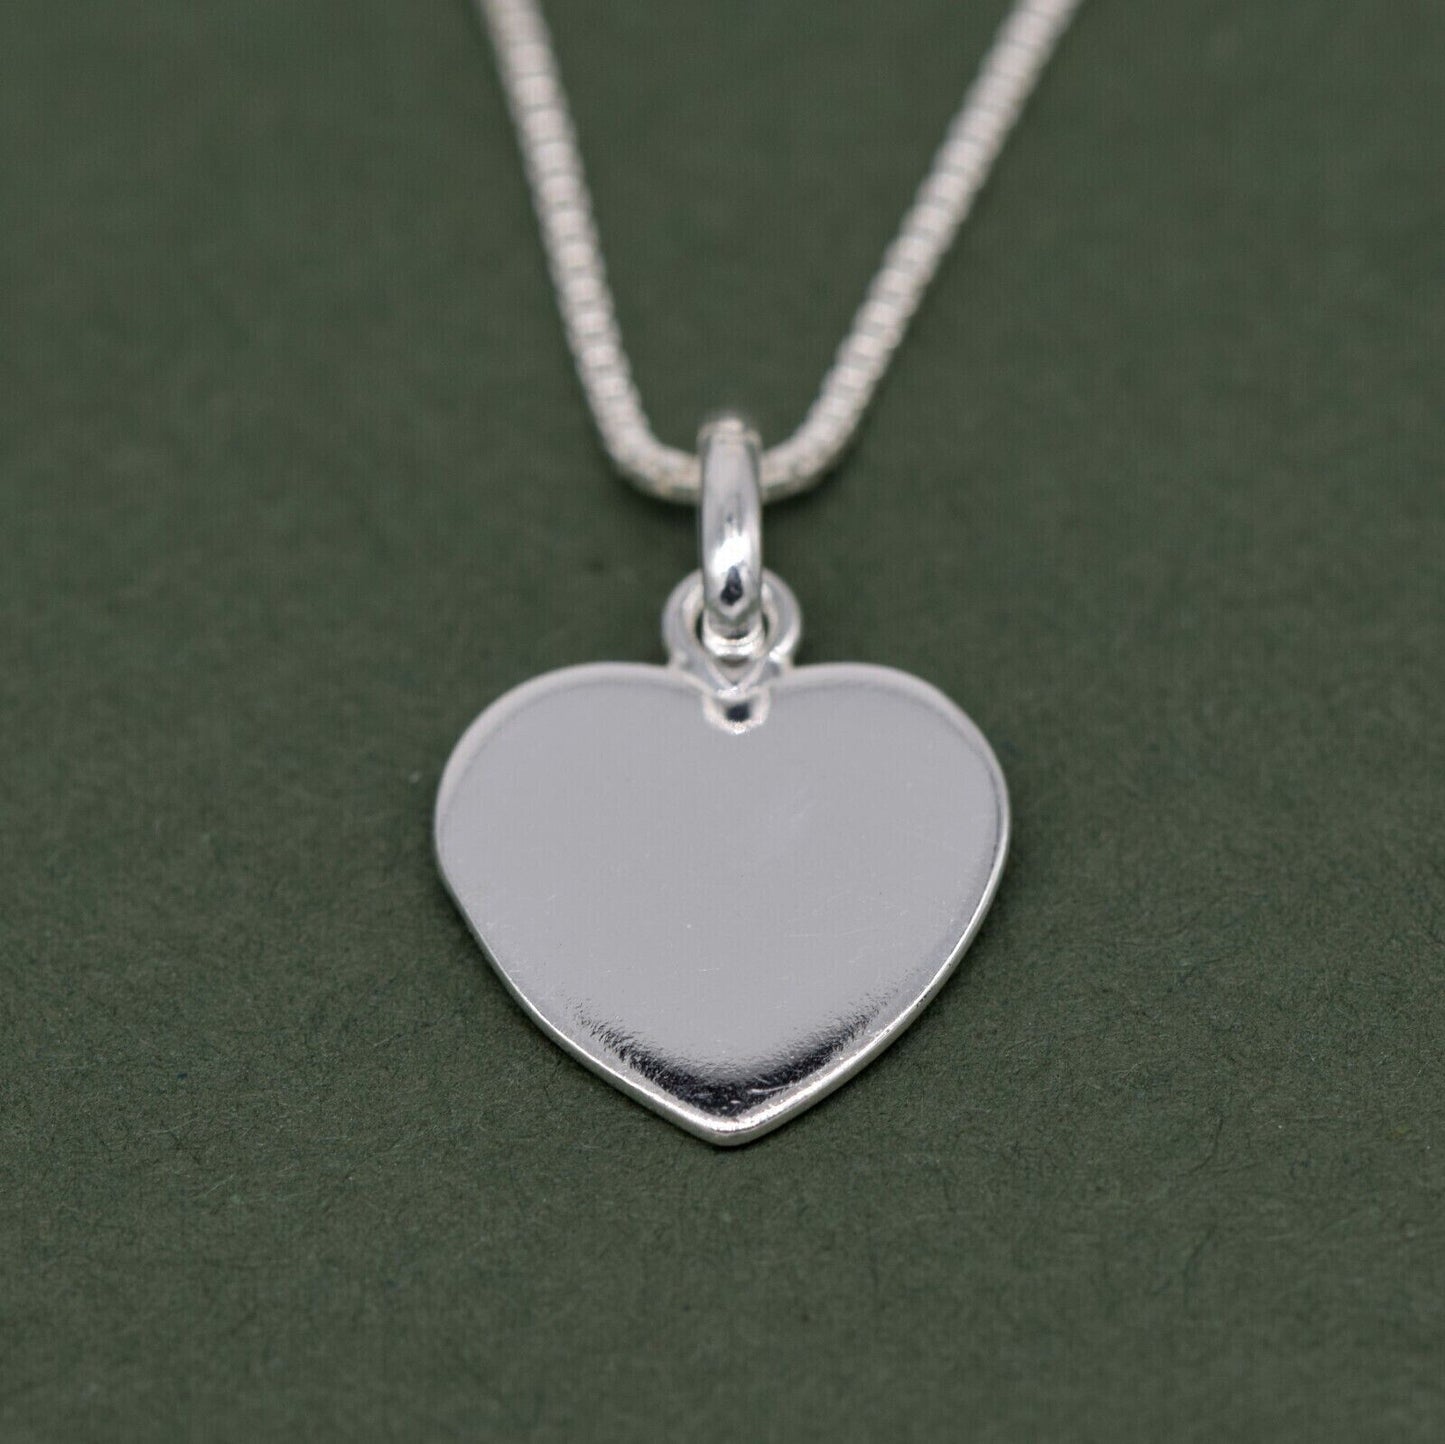 Genuine 925 Sterling Silver Flat Heart Pendant Necklace on 14”-24" Box Chain